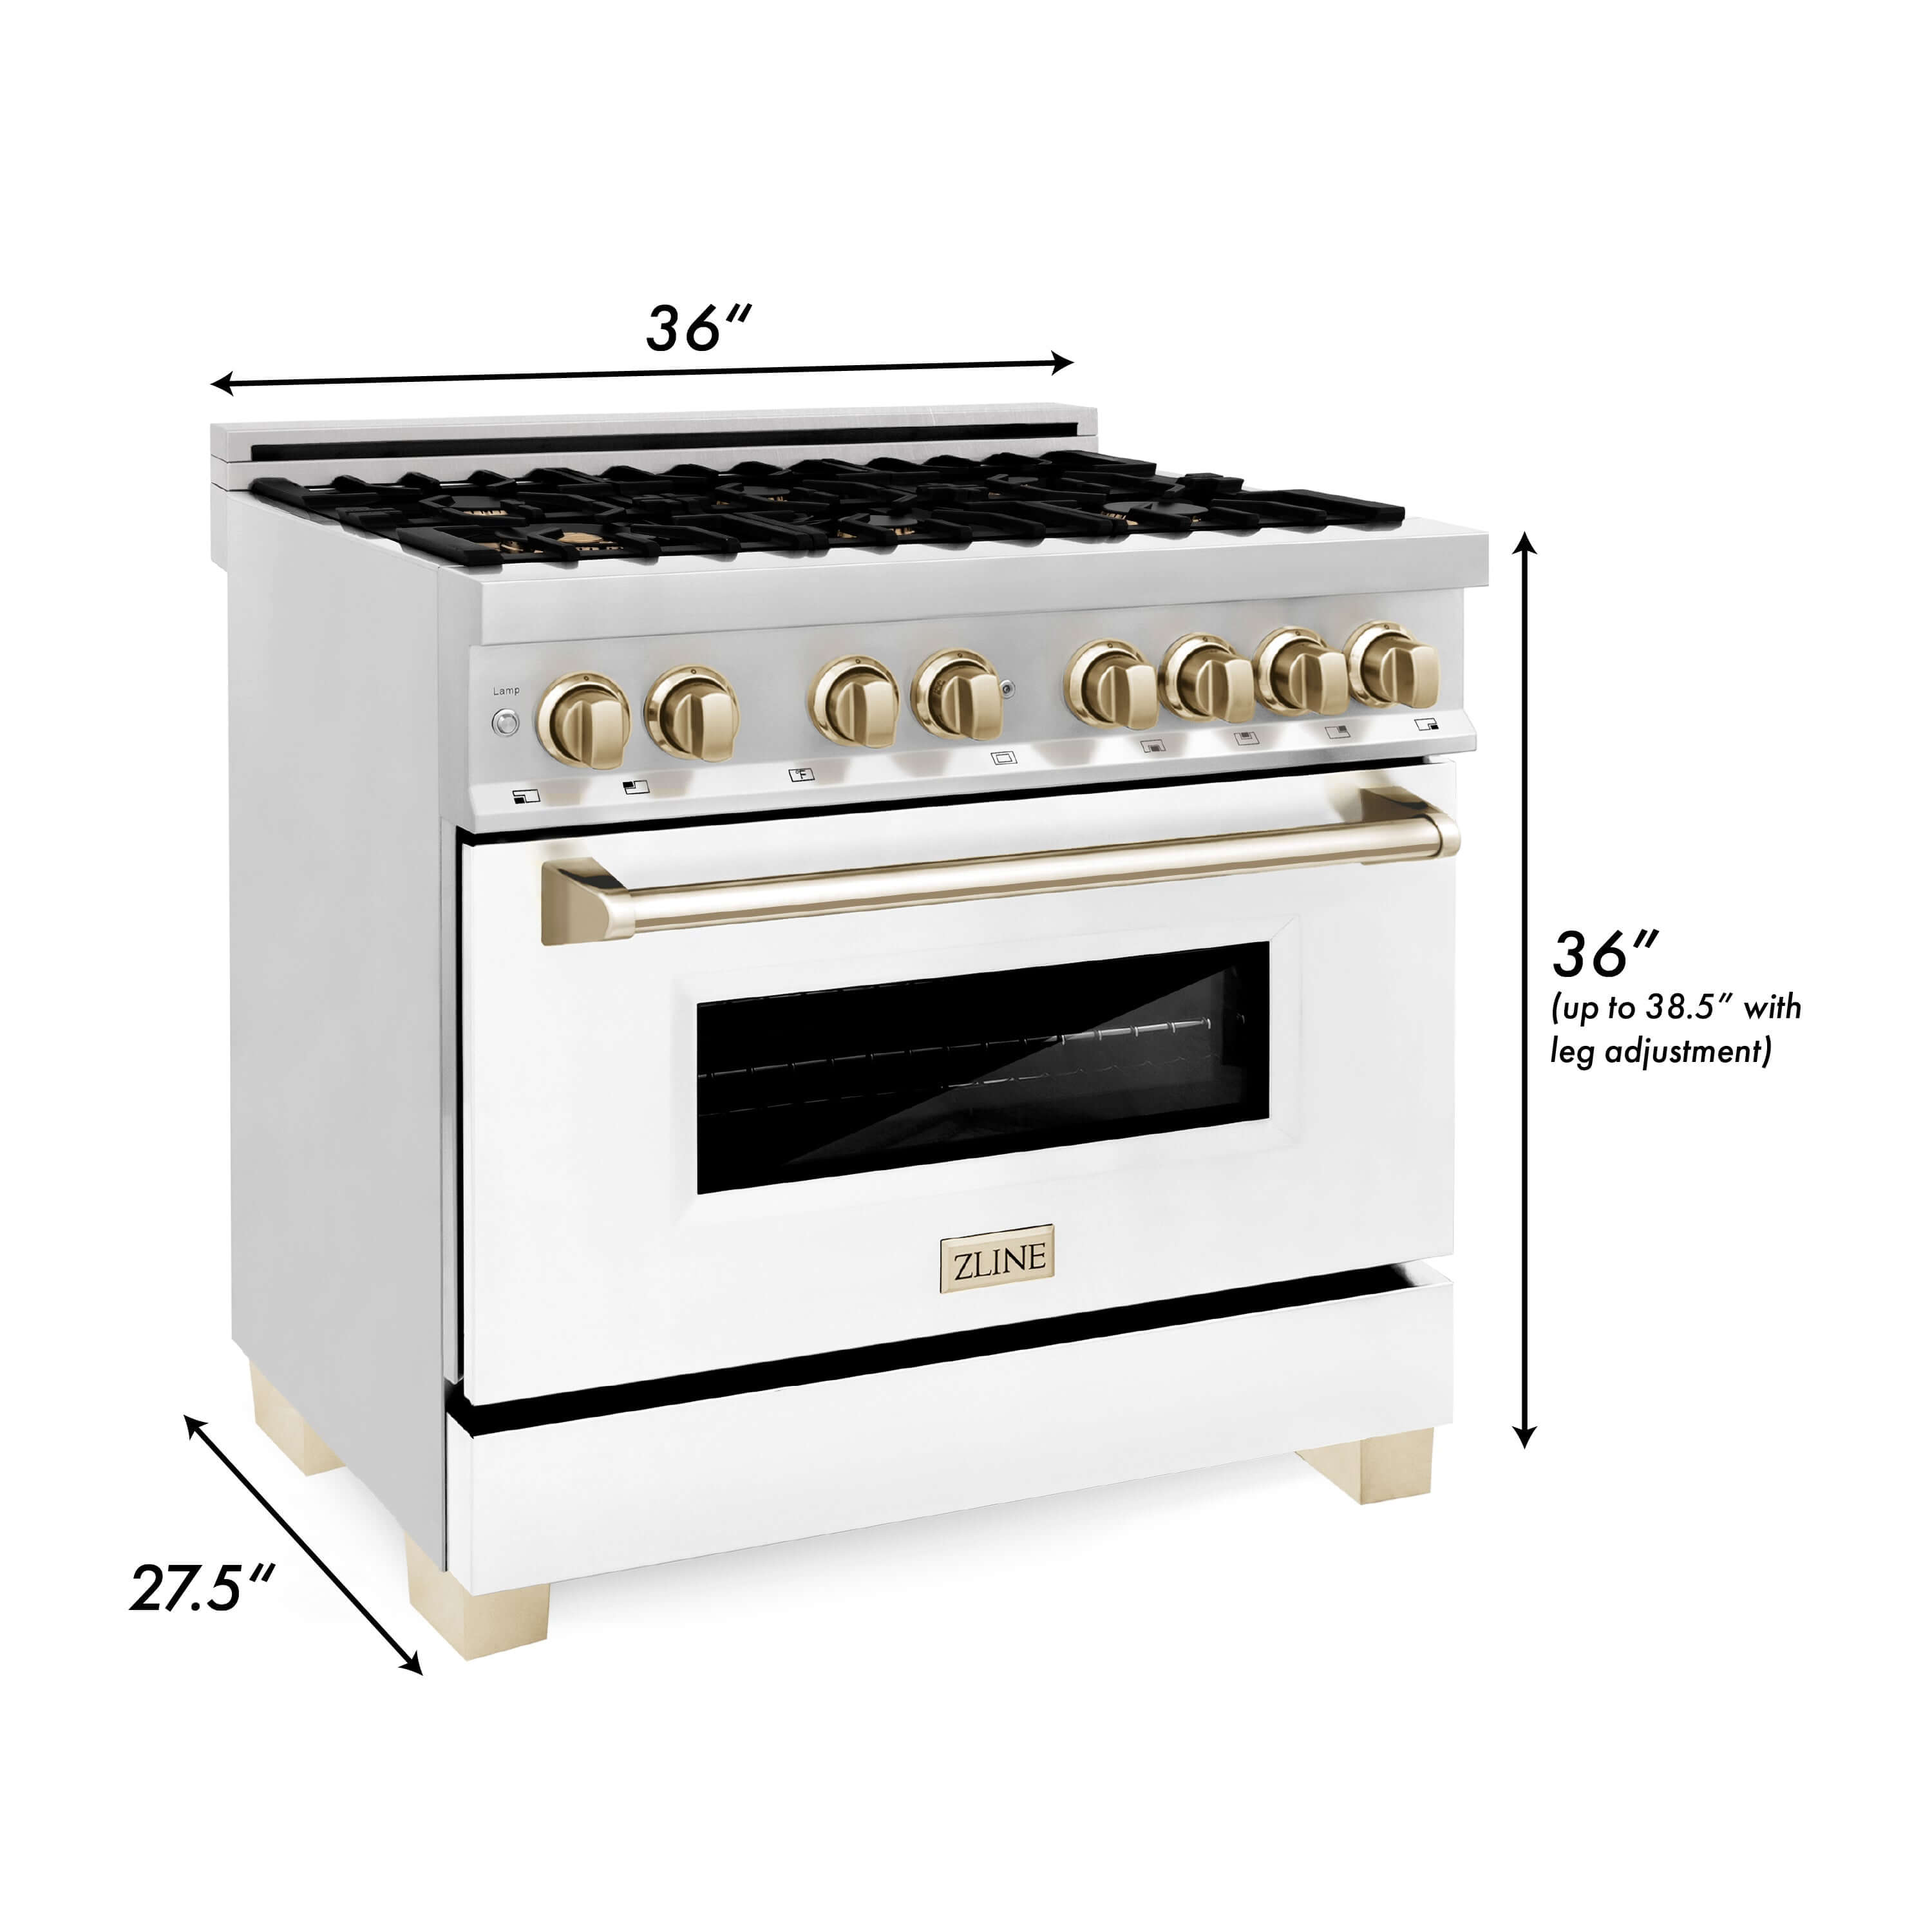 ZLINE Autograph Edition 36 in. Kitchen Package with Stainless Steel Dual Fuel Range with White Matte Door and Range Hood with Polished Gold Accents (2AKP-RAWMRH36-G) dimensional diagram with measurements.